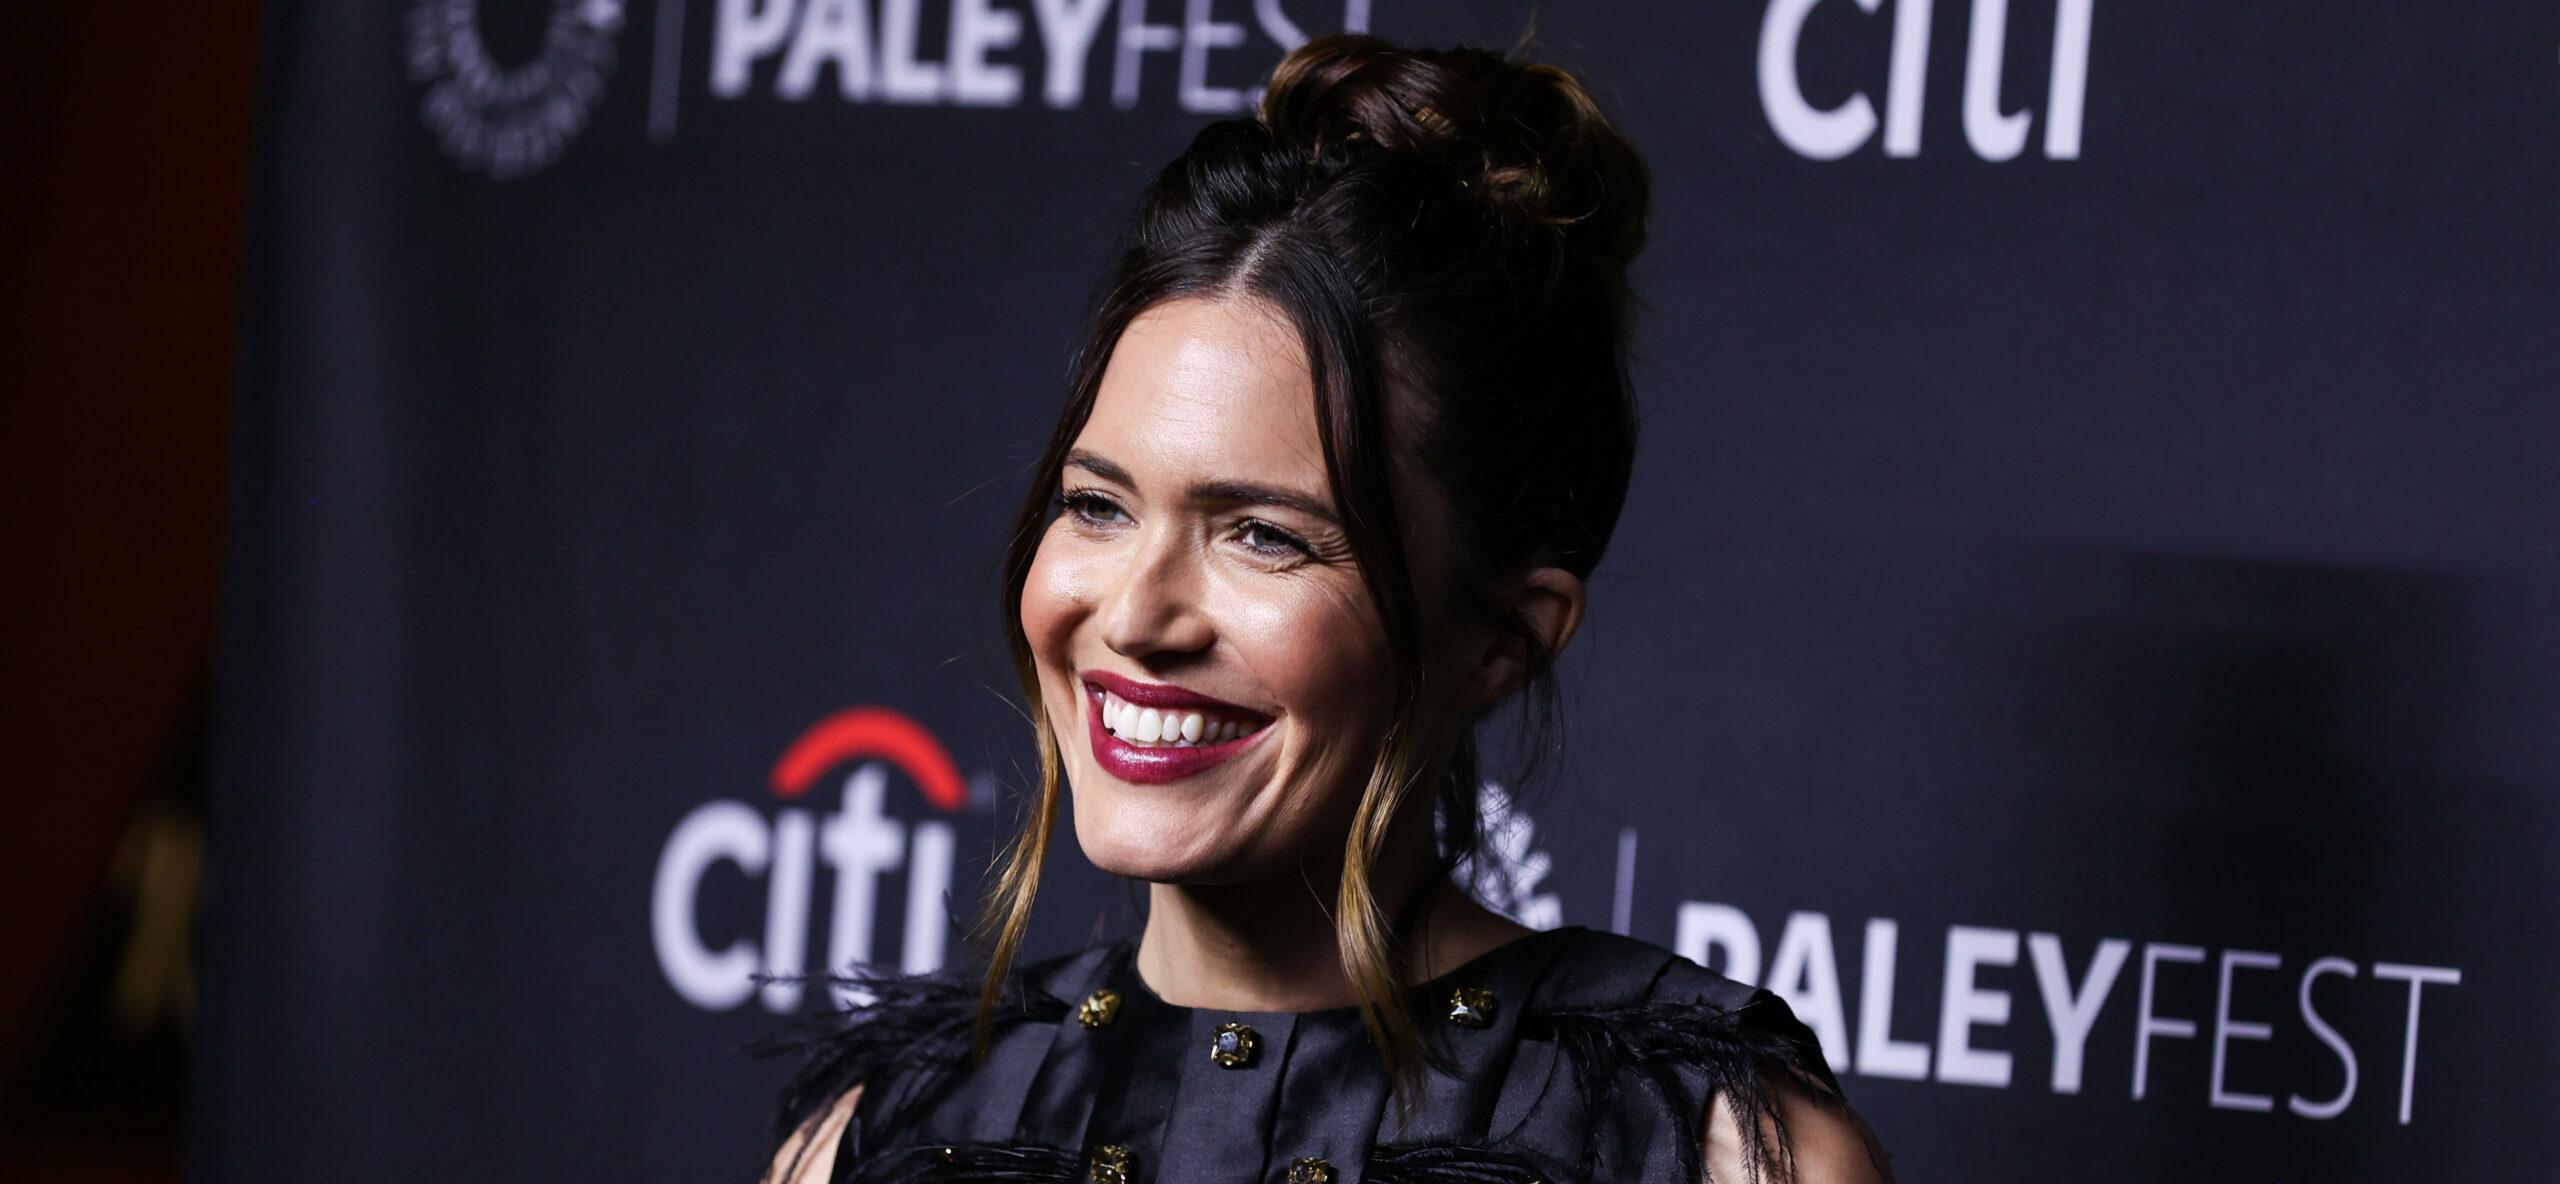 Mandy Moore Reveals How Her ‘Abusive’ Marriage Led Her To An ‘Isolated’ Place